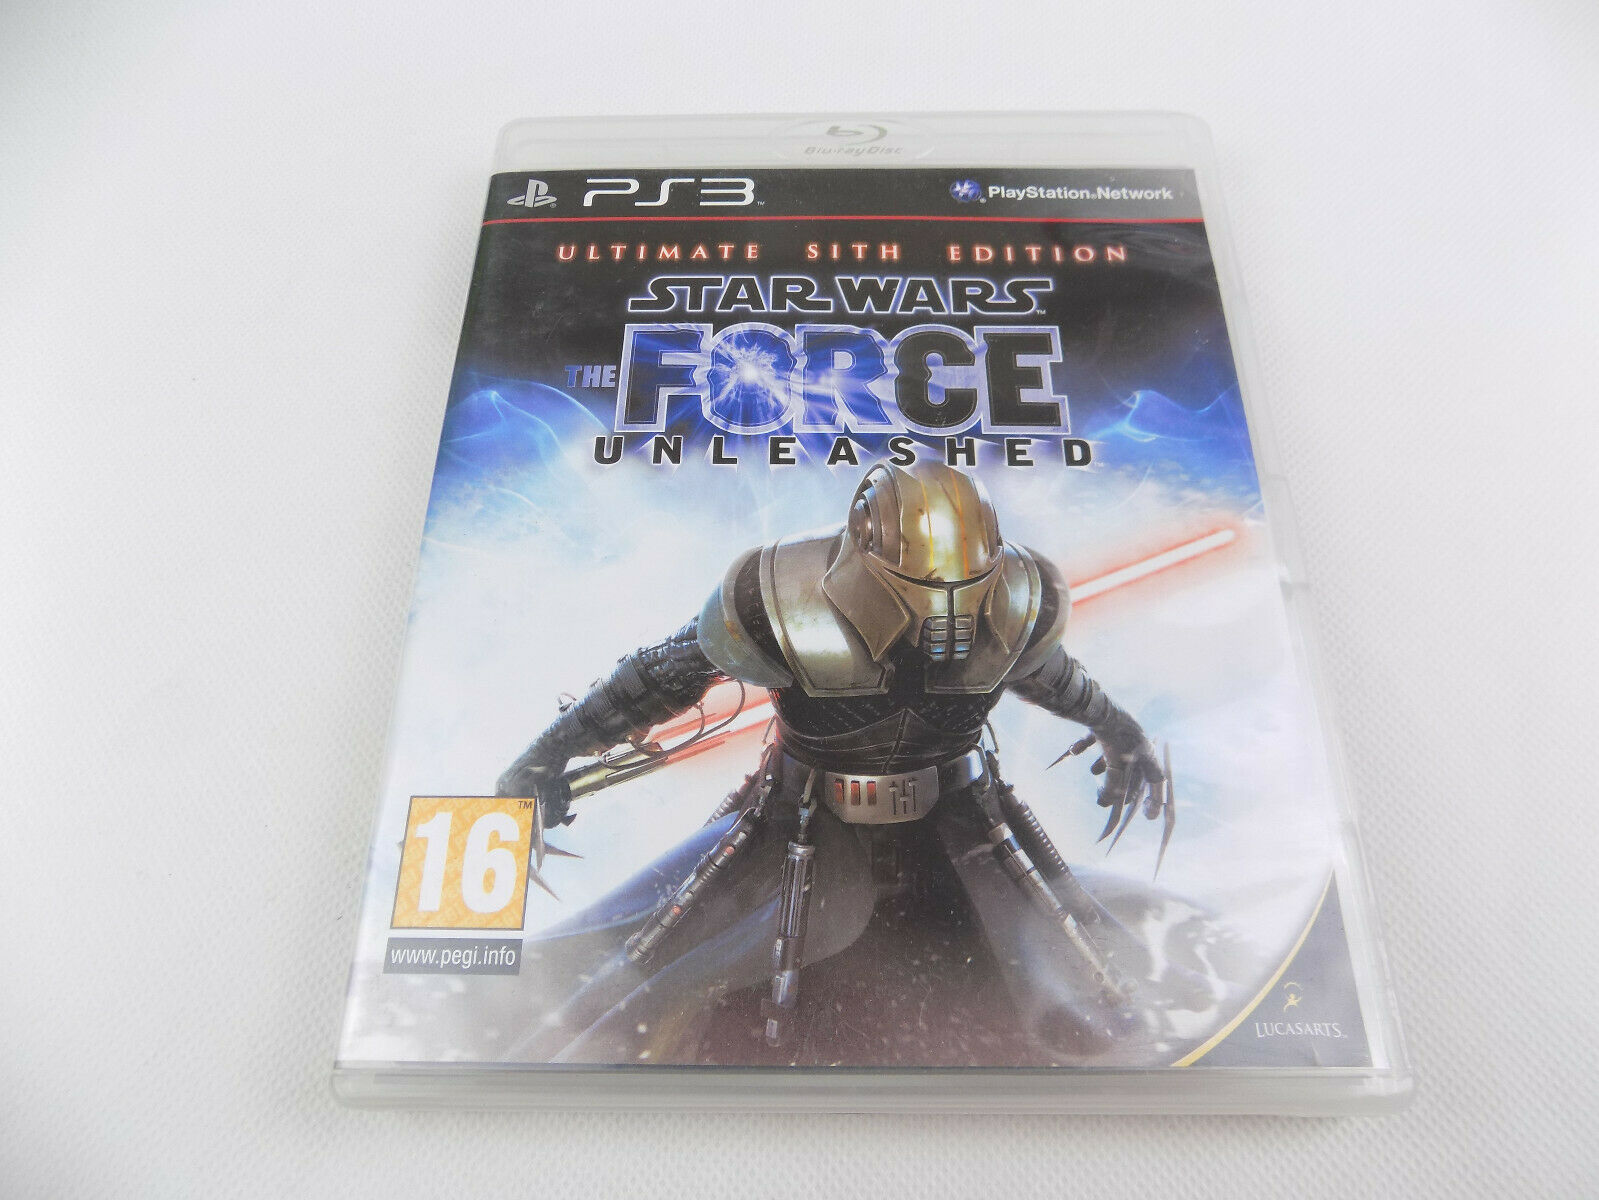 Mint Disc Playstation 3 Ps3 Star Wars The Force Unleashed Ultimate Sith Edition Ebay